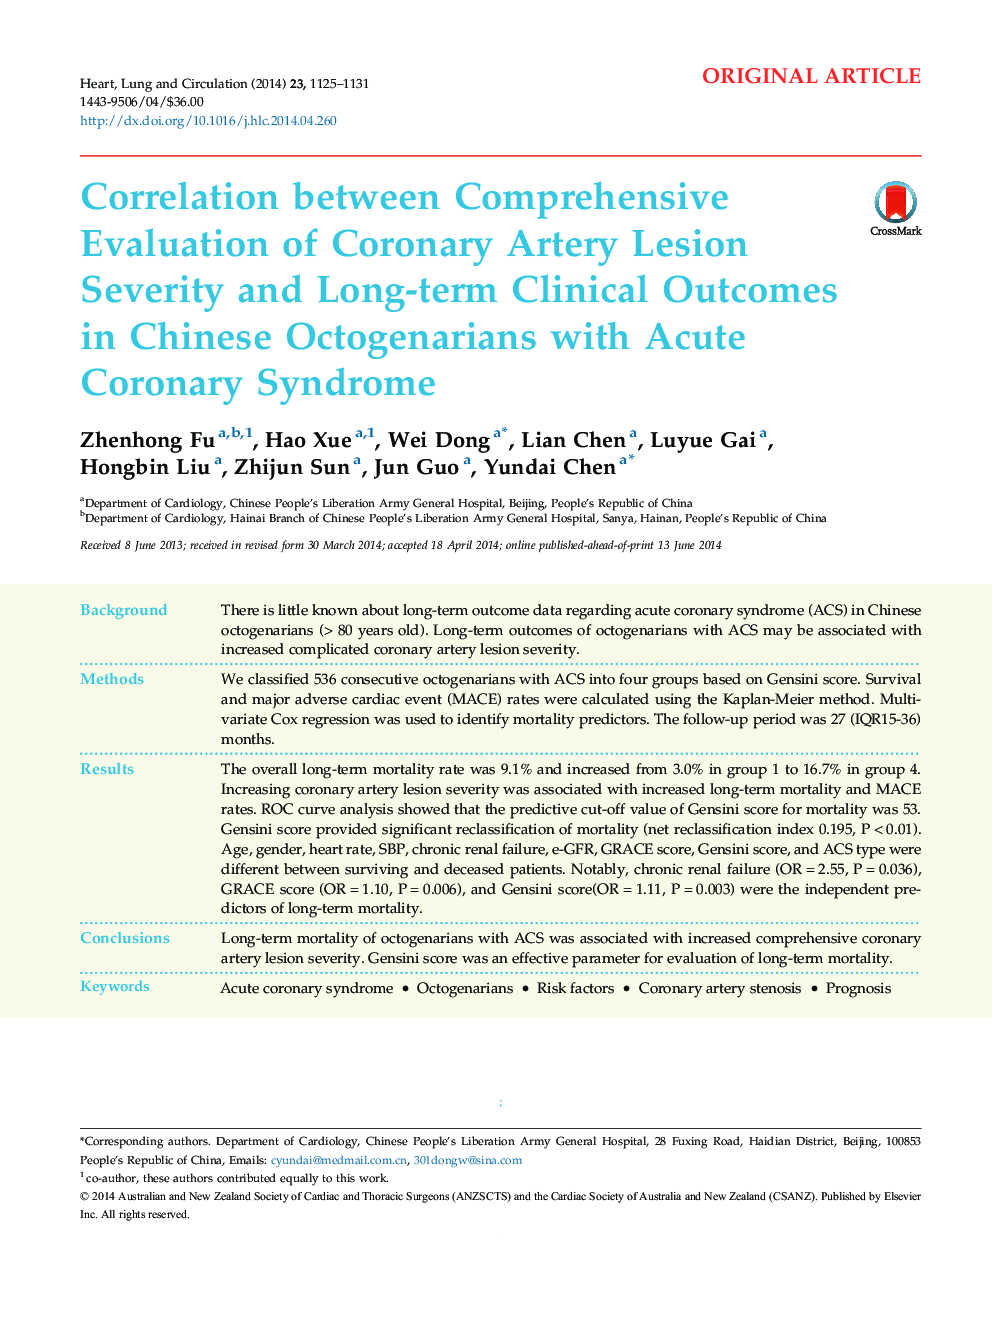 Correlation between Comprehensive Evaluation of Coronary Artery Lesion Severity and Long-term Clinical Outcomes in Chinese Octogenarians with Acute Coronary Syndrome